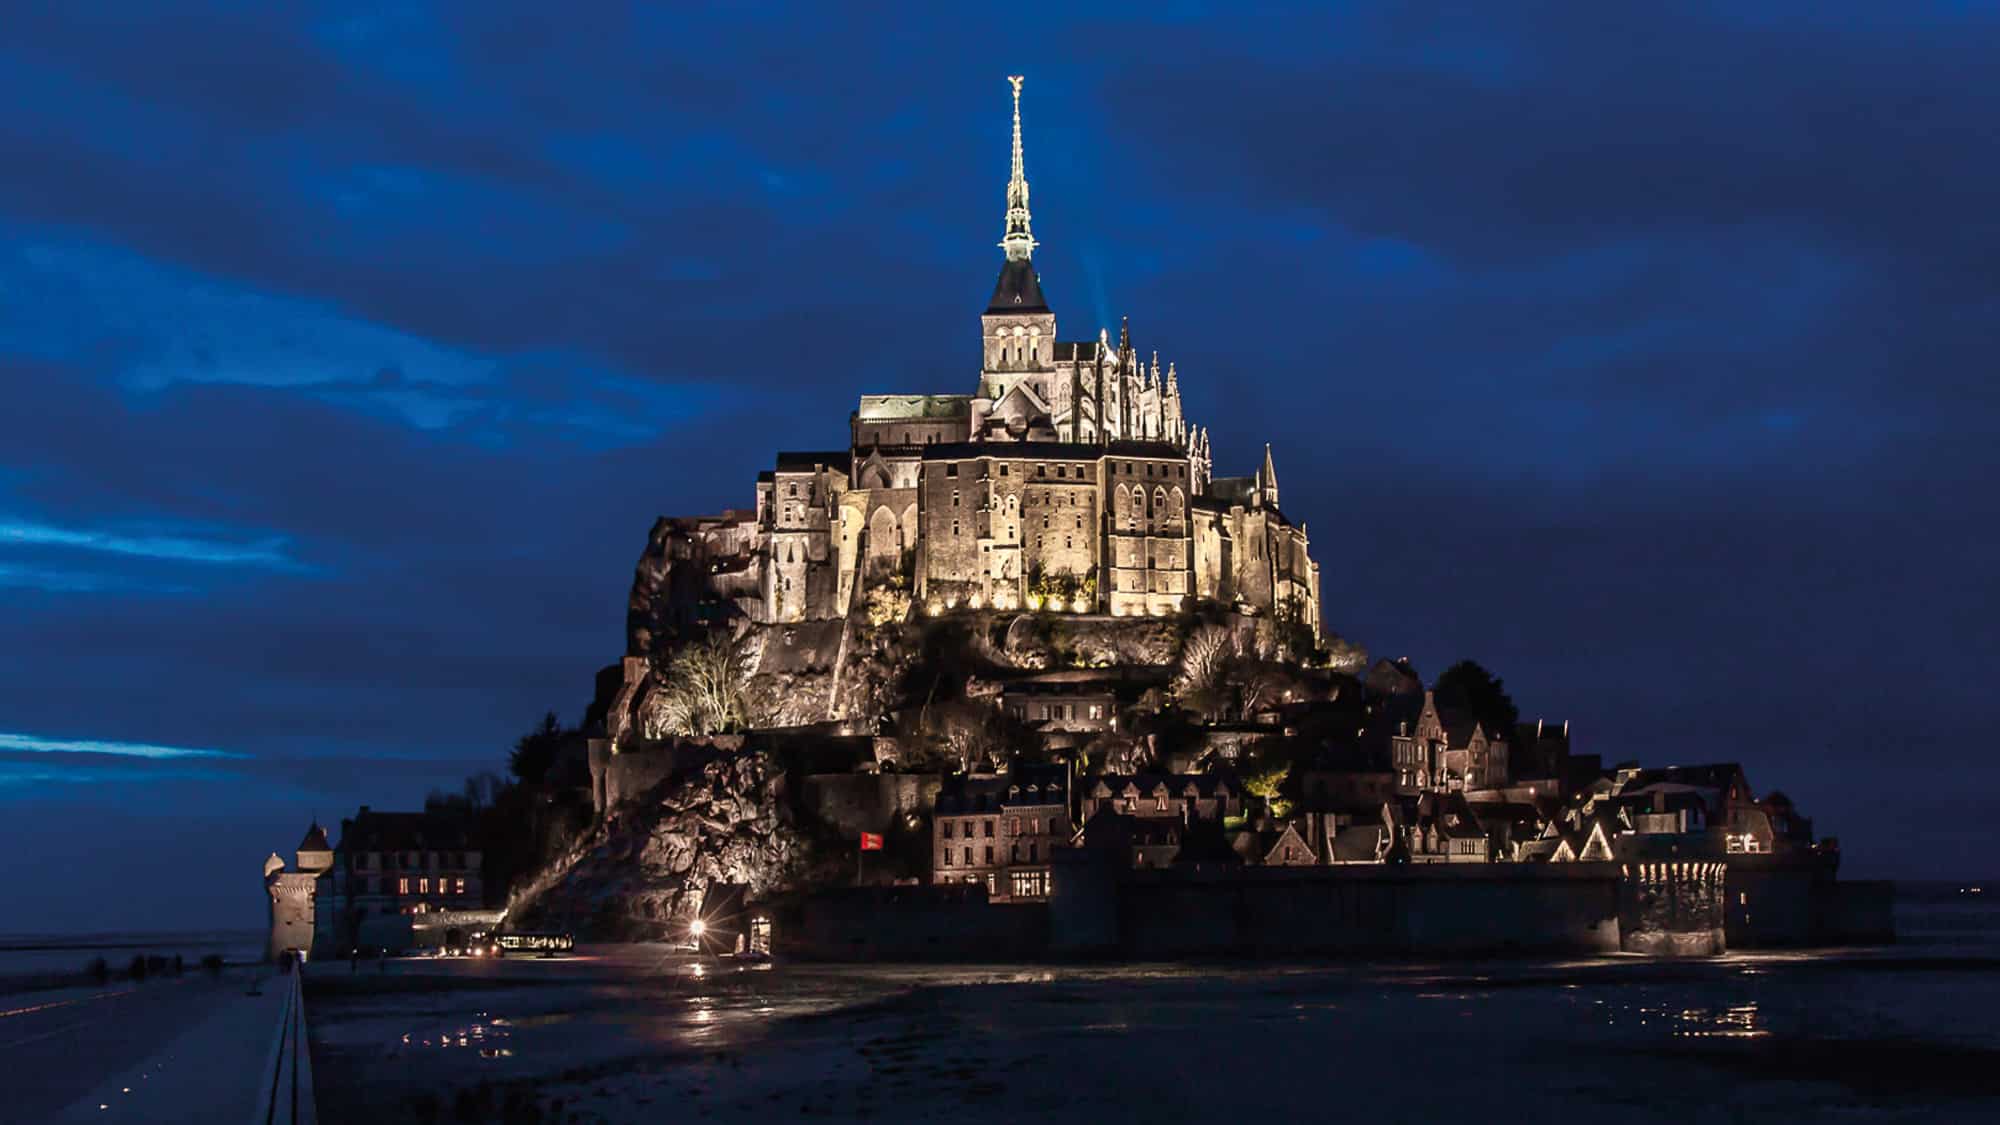 Mont Saint Michael rises from the water forming one of the best islands to visit at high tide